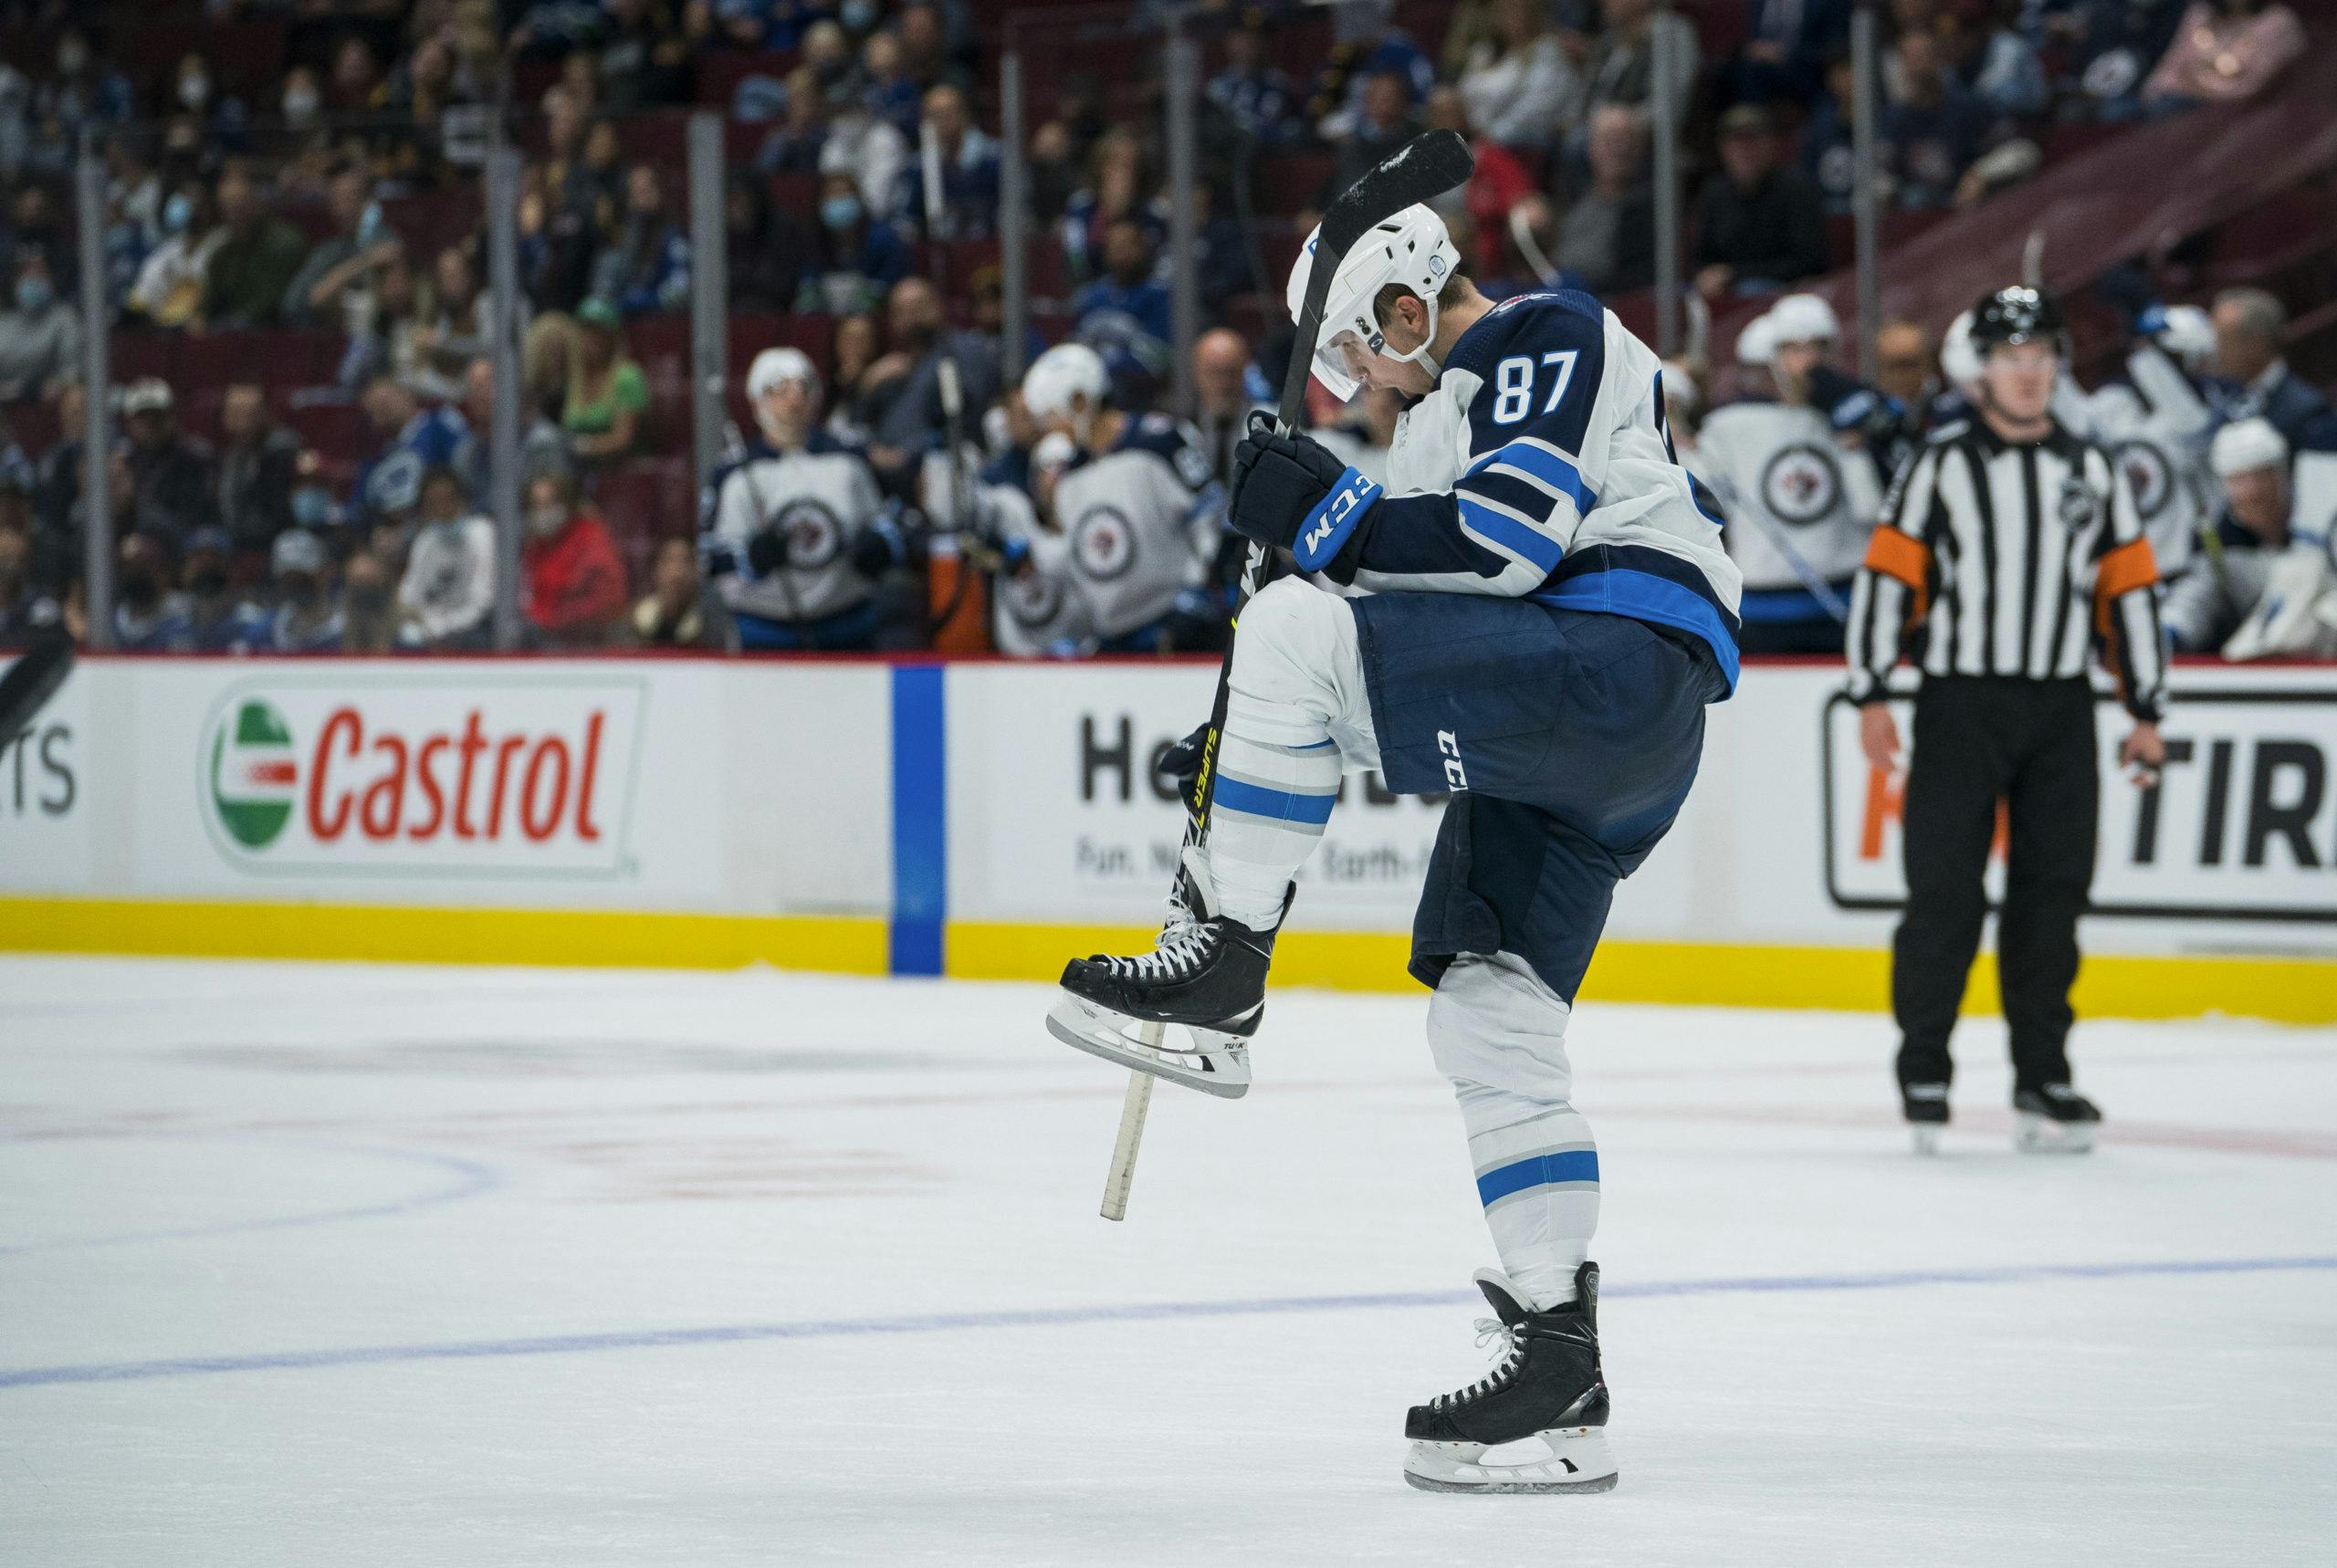 Winnipeg Jets forward Kristian Reichel (87) celebrates his goal against the Vancouver Canucks in the third period at Rogers Arena. Canucks won 3-2.